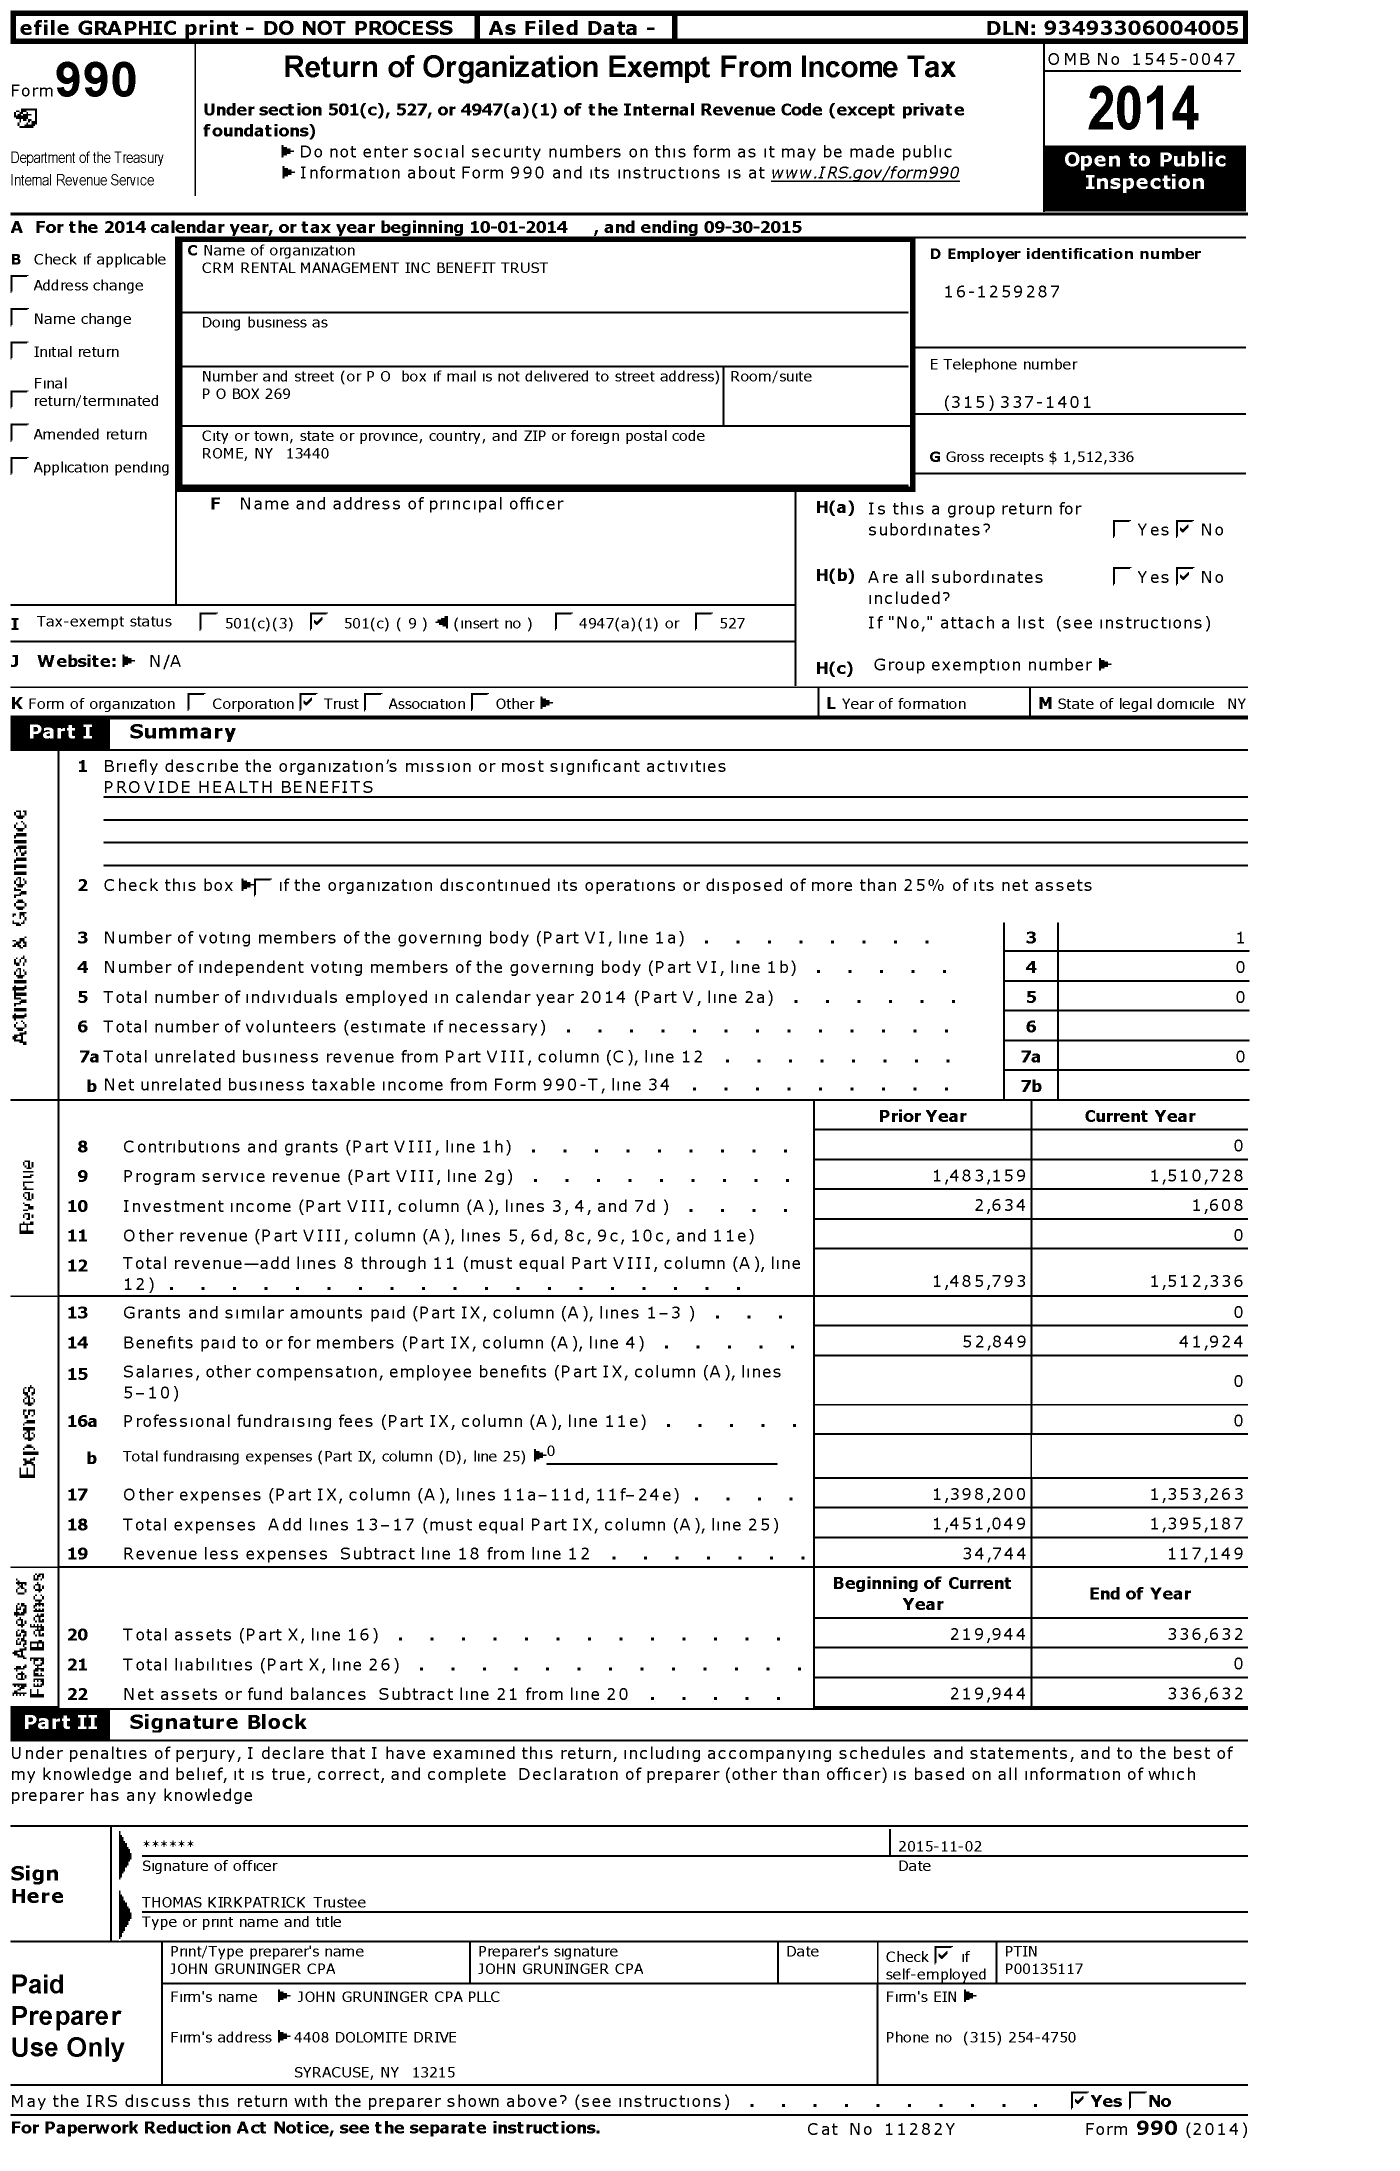 Image of first page of 2014 Form 990O for CRM Rental Management Benefit Trust